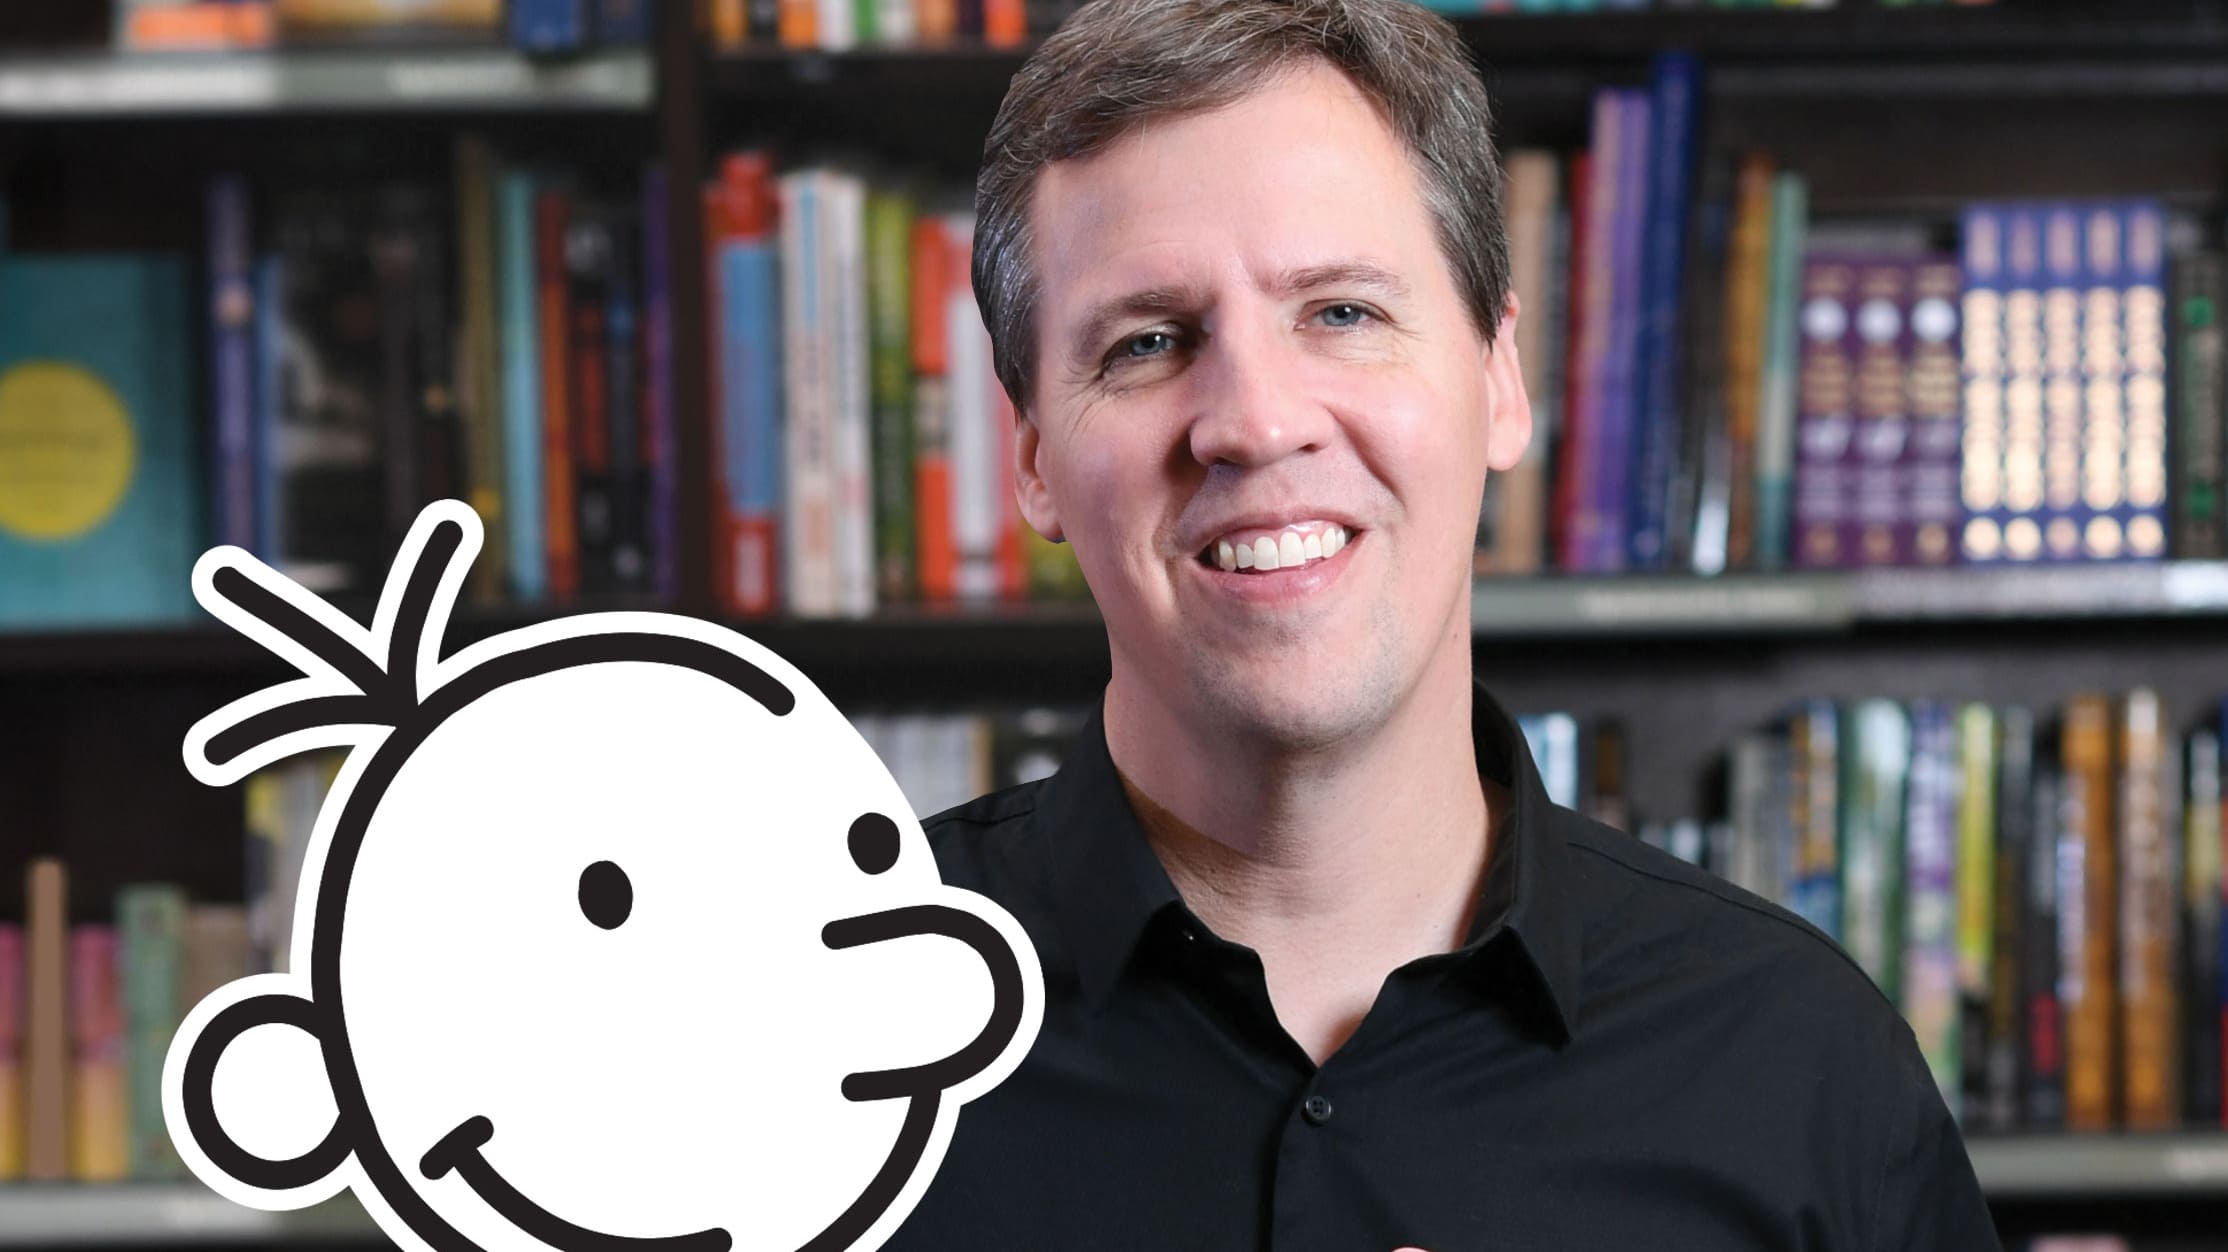 Exclusive Interview With “Diary Of A Wimpy Kid: Rodrick Rules” Creator Jeff  Kinney – What's On Disney Plus